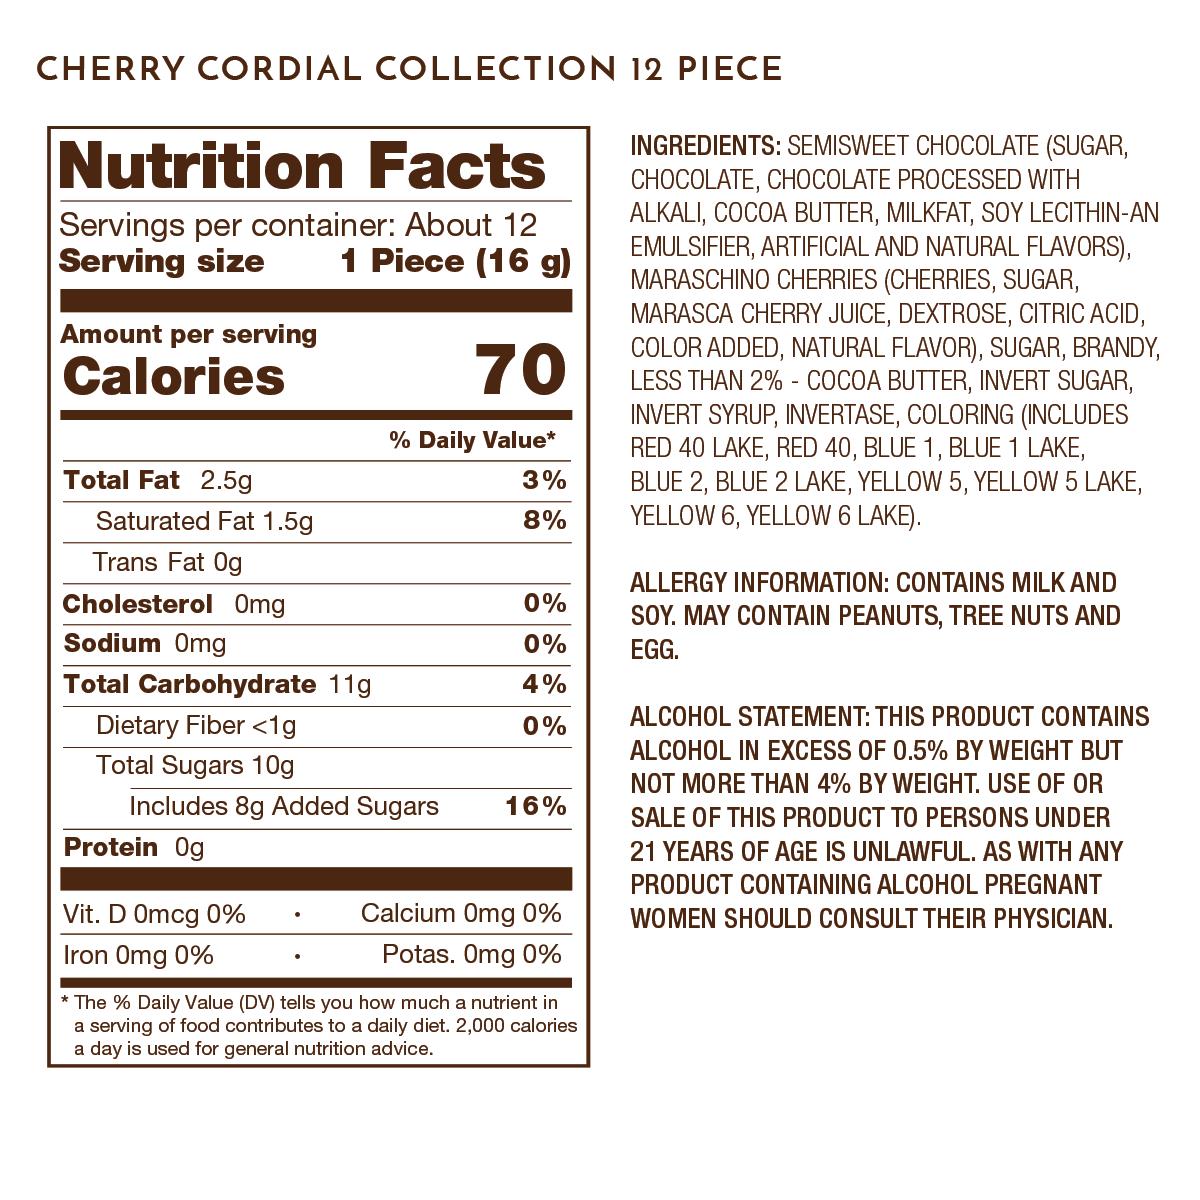 Nutrition Facts, Allergy and Ingredients Label on Cherry Cordials 12 Piece.